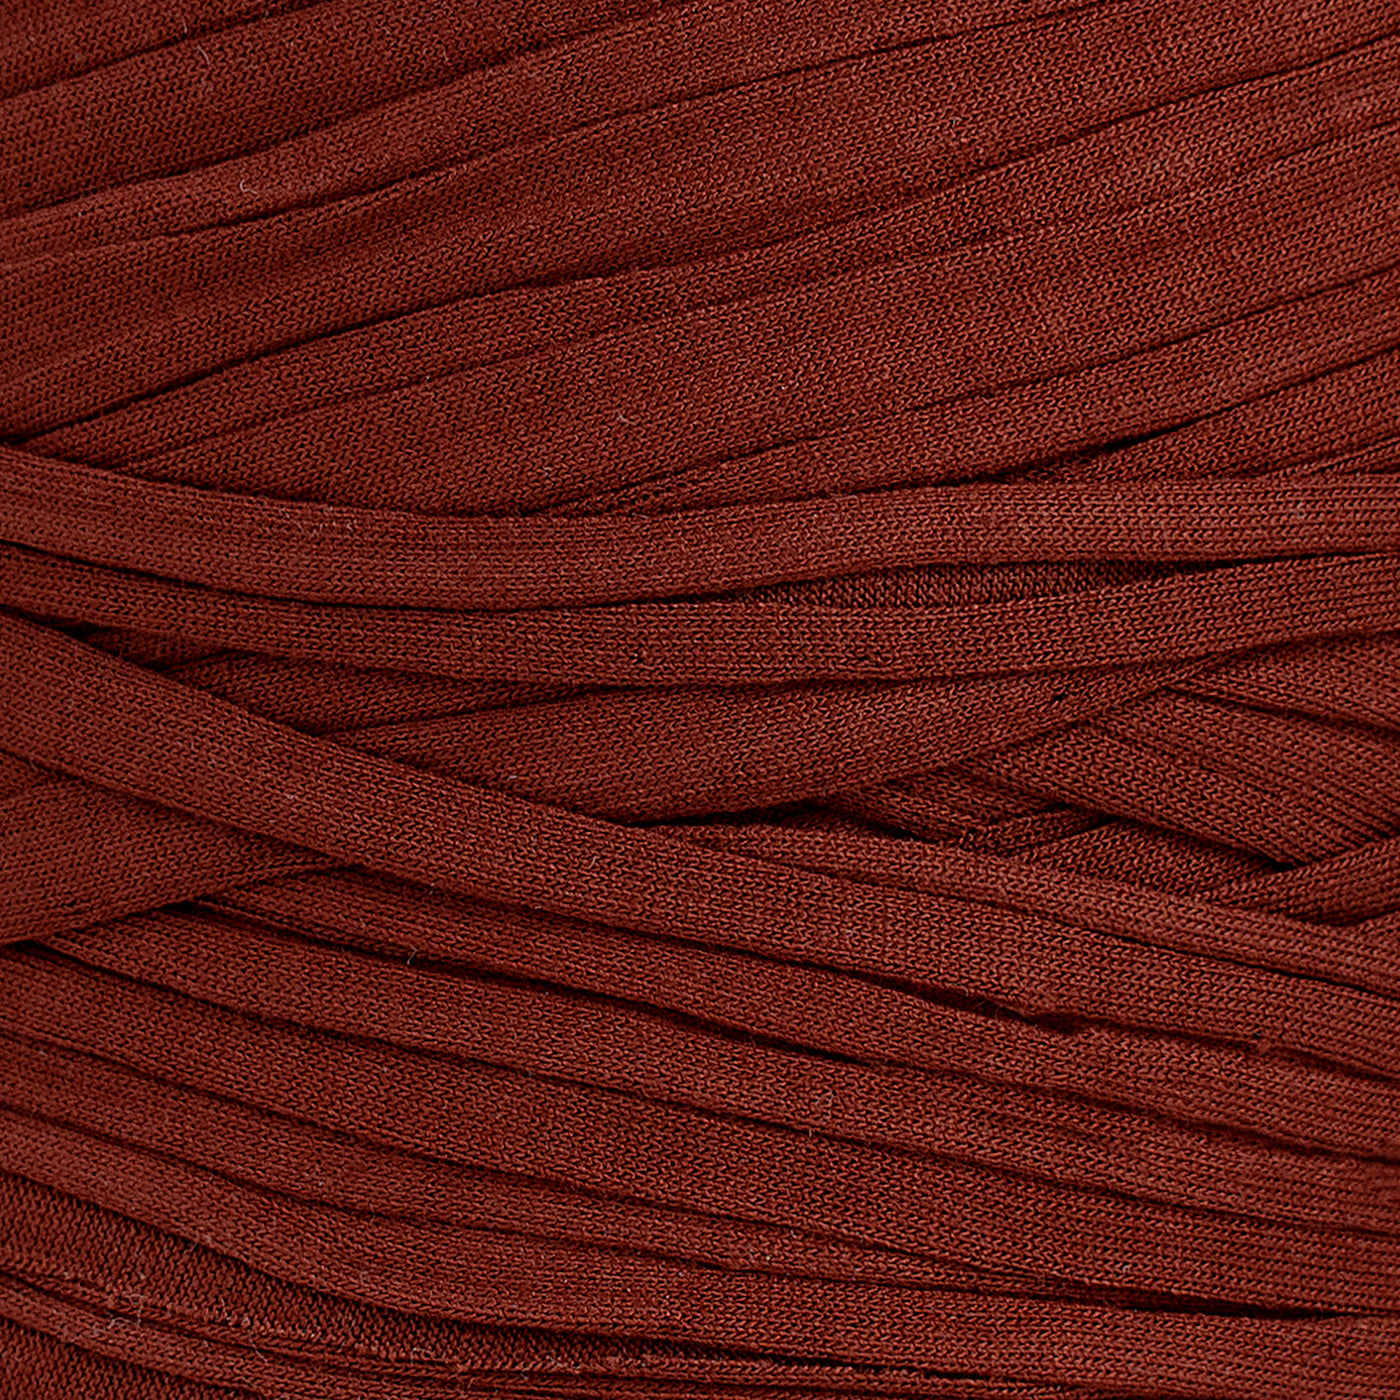 Recycled T-Shirt Fabric Yarn - Red Amber Color